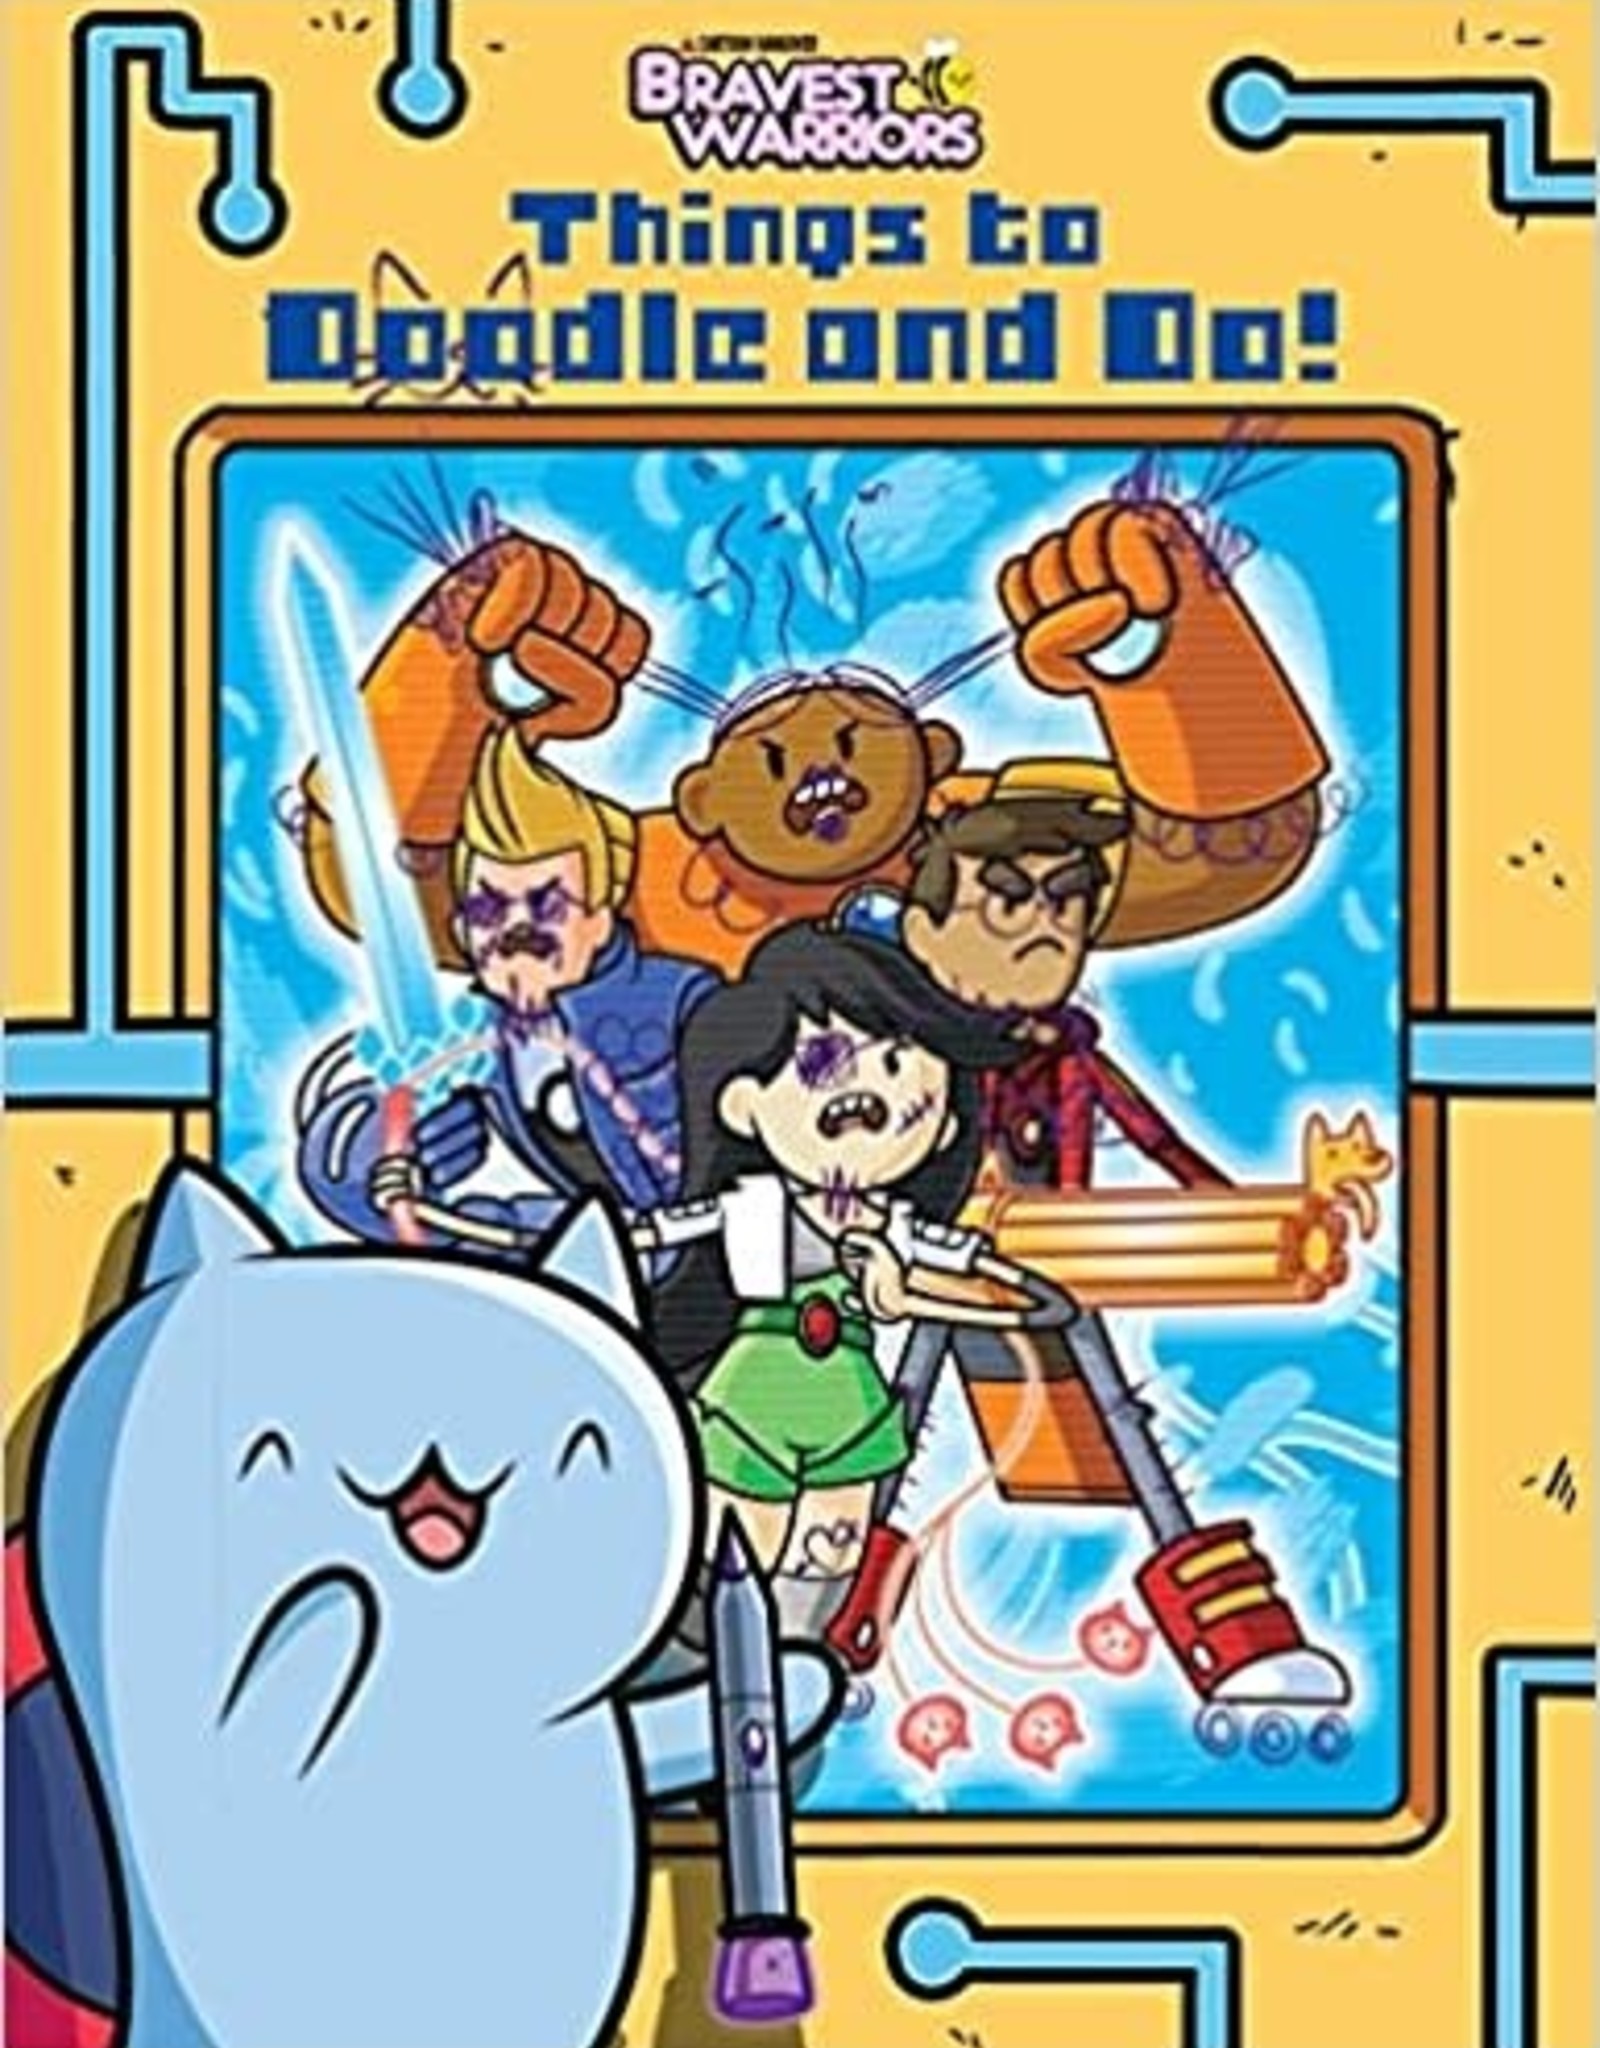 Bravest Warriors: Things to Doodle and Do! Paperback